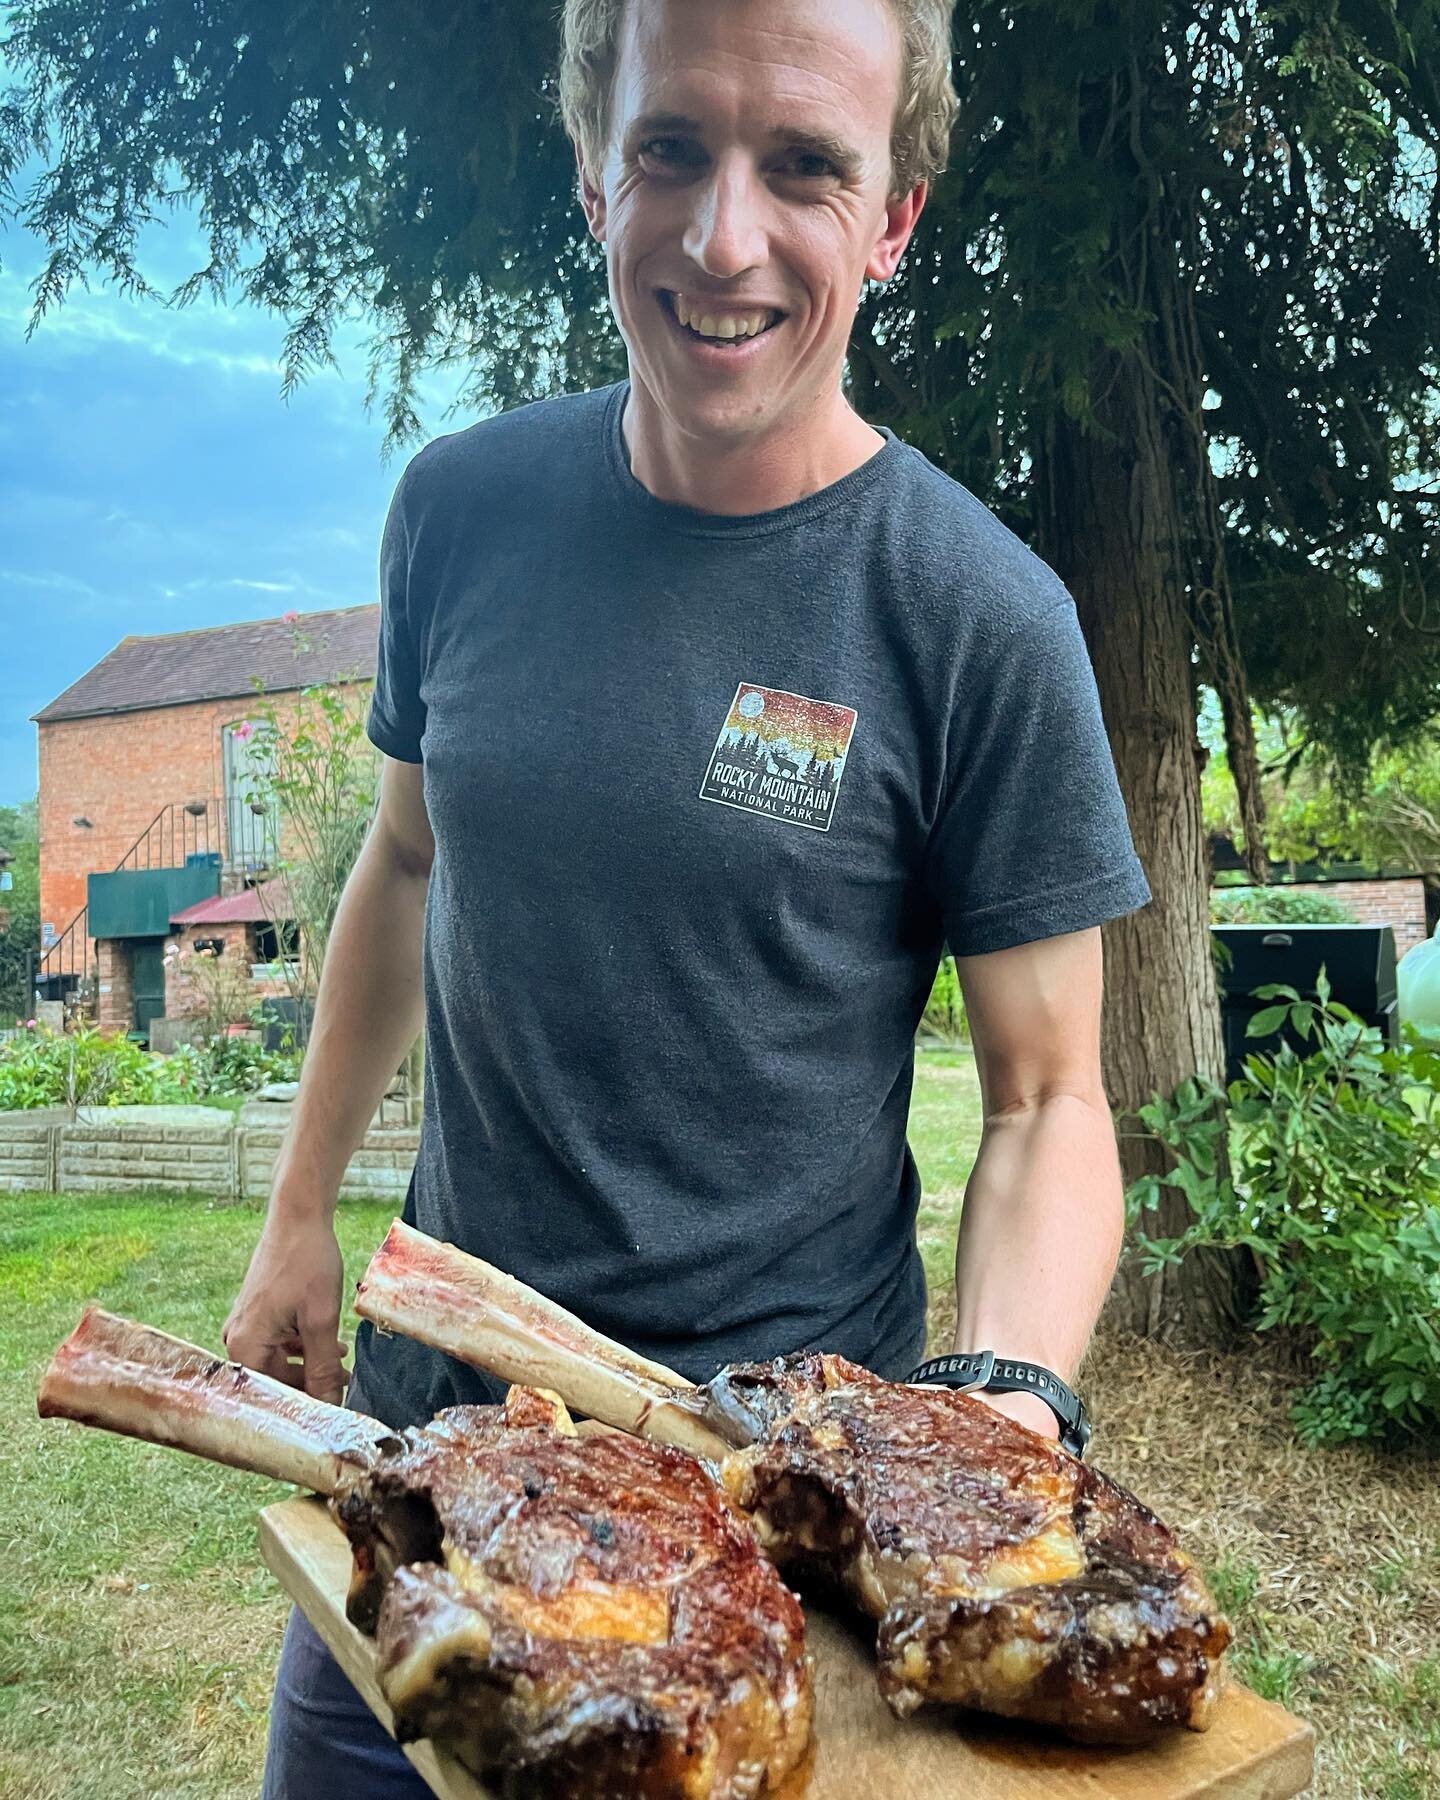 Friday night #tomahawksteak with a side of 🍷, 🧀 and good company #cookingwithfire #summer #autumnvibes @kadaifirebowls #outdoorcooking #glamping #farmstay #farmsnotfactories #thinklocalactglobal #britishbutchers #eatbritish